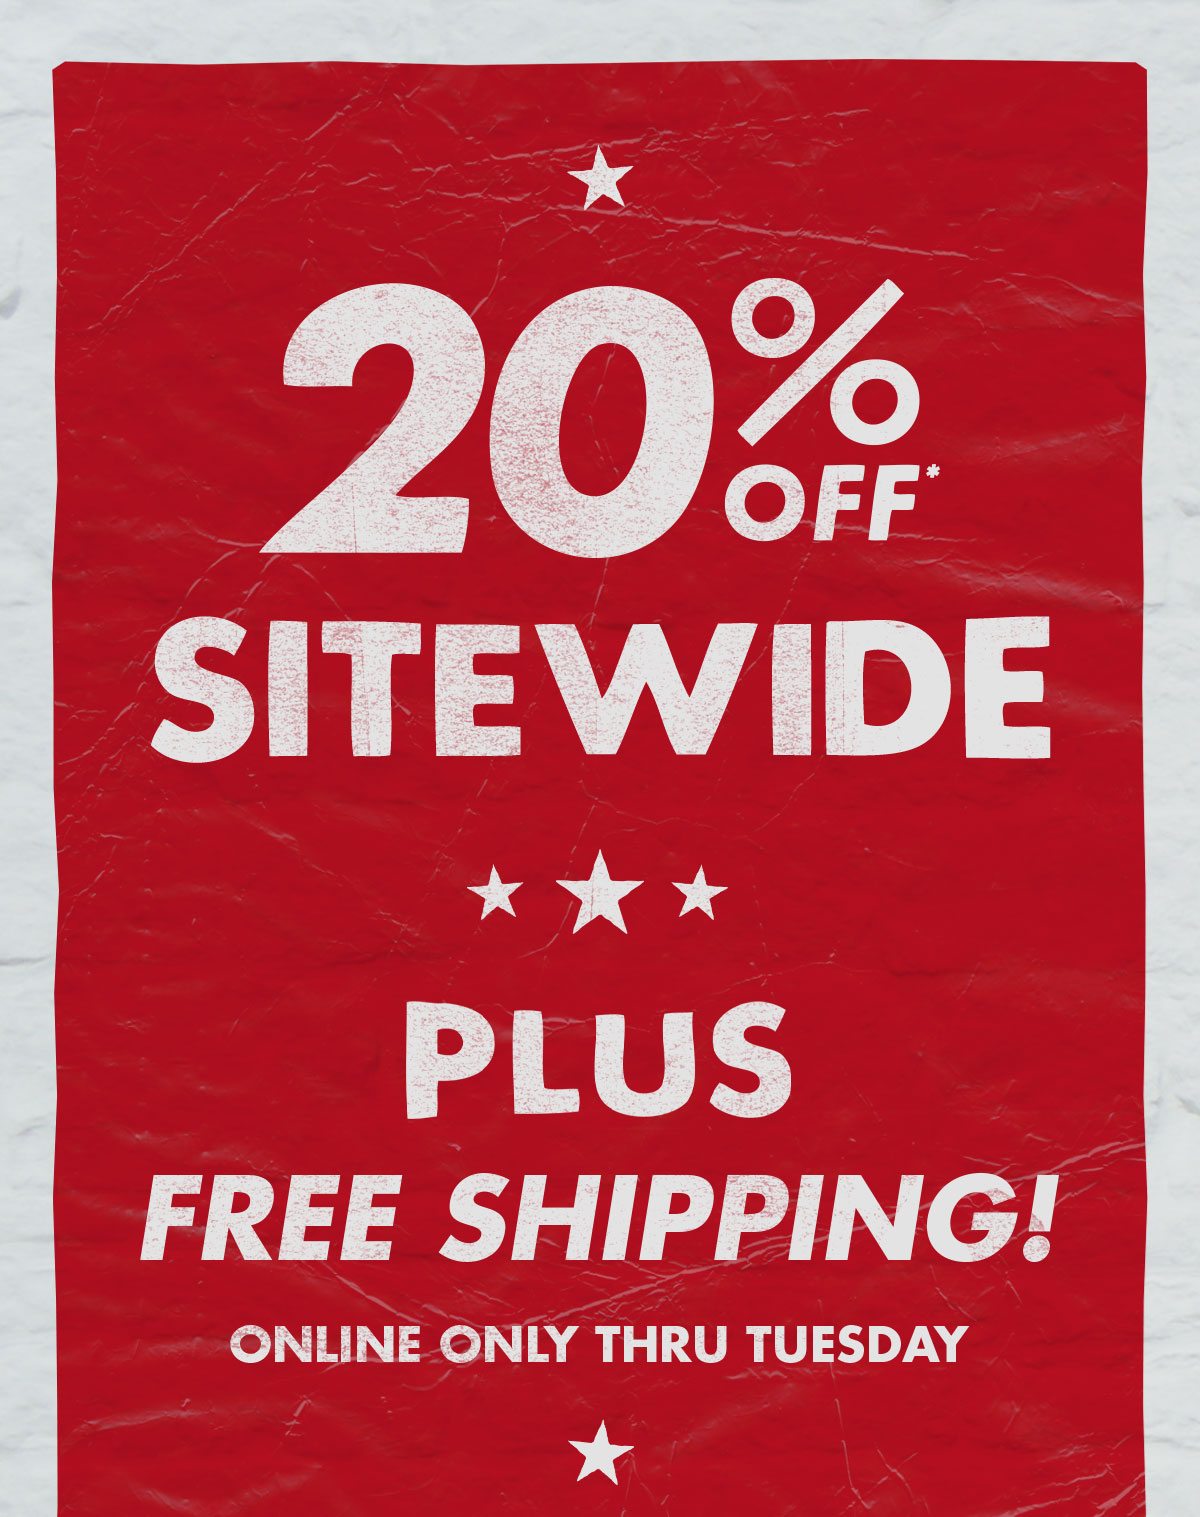 20% Off* Sitewide + Free Shipping! Online only, thru Tuesday.